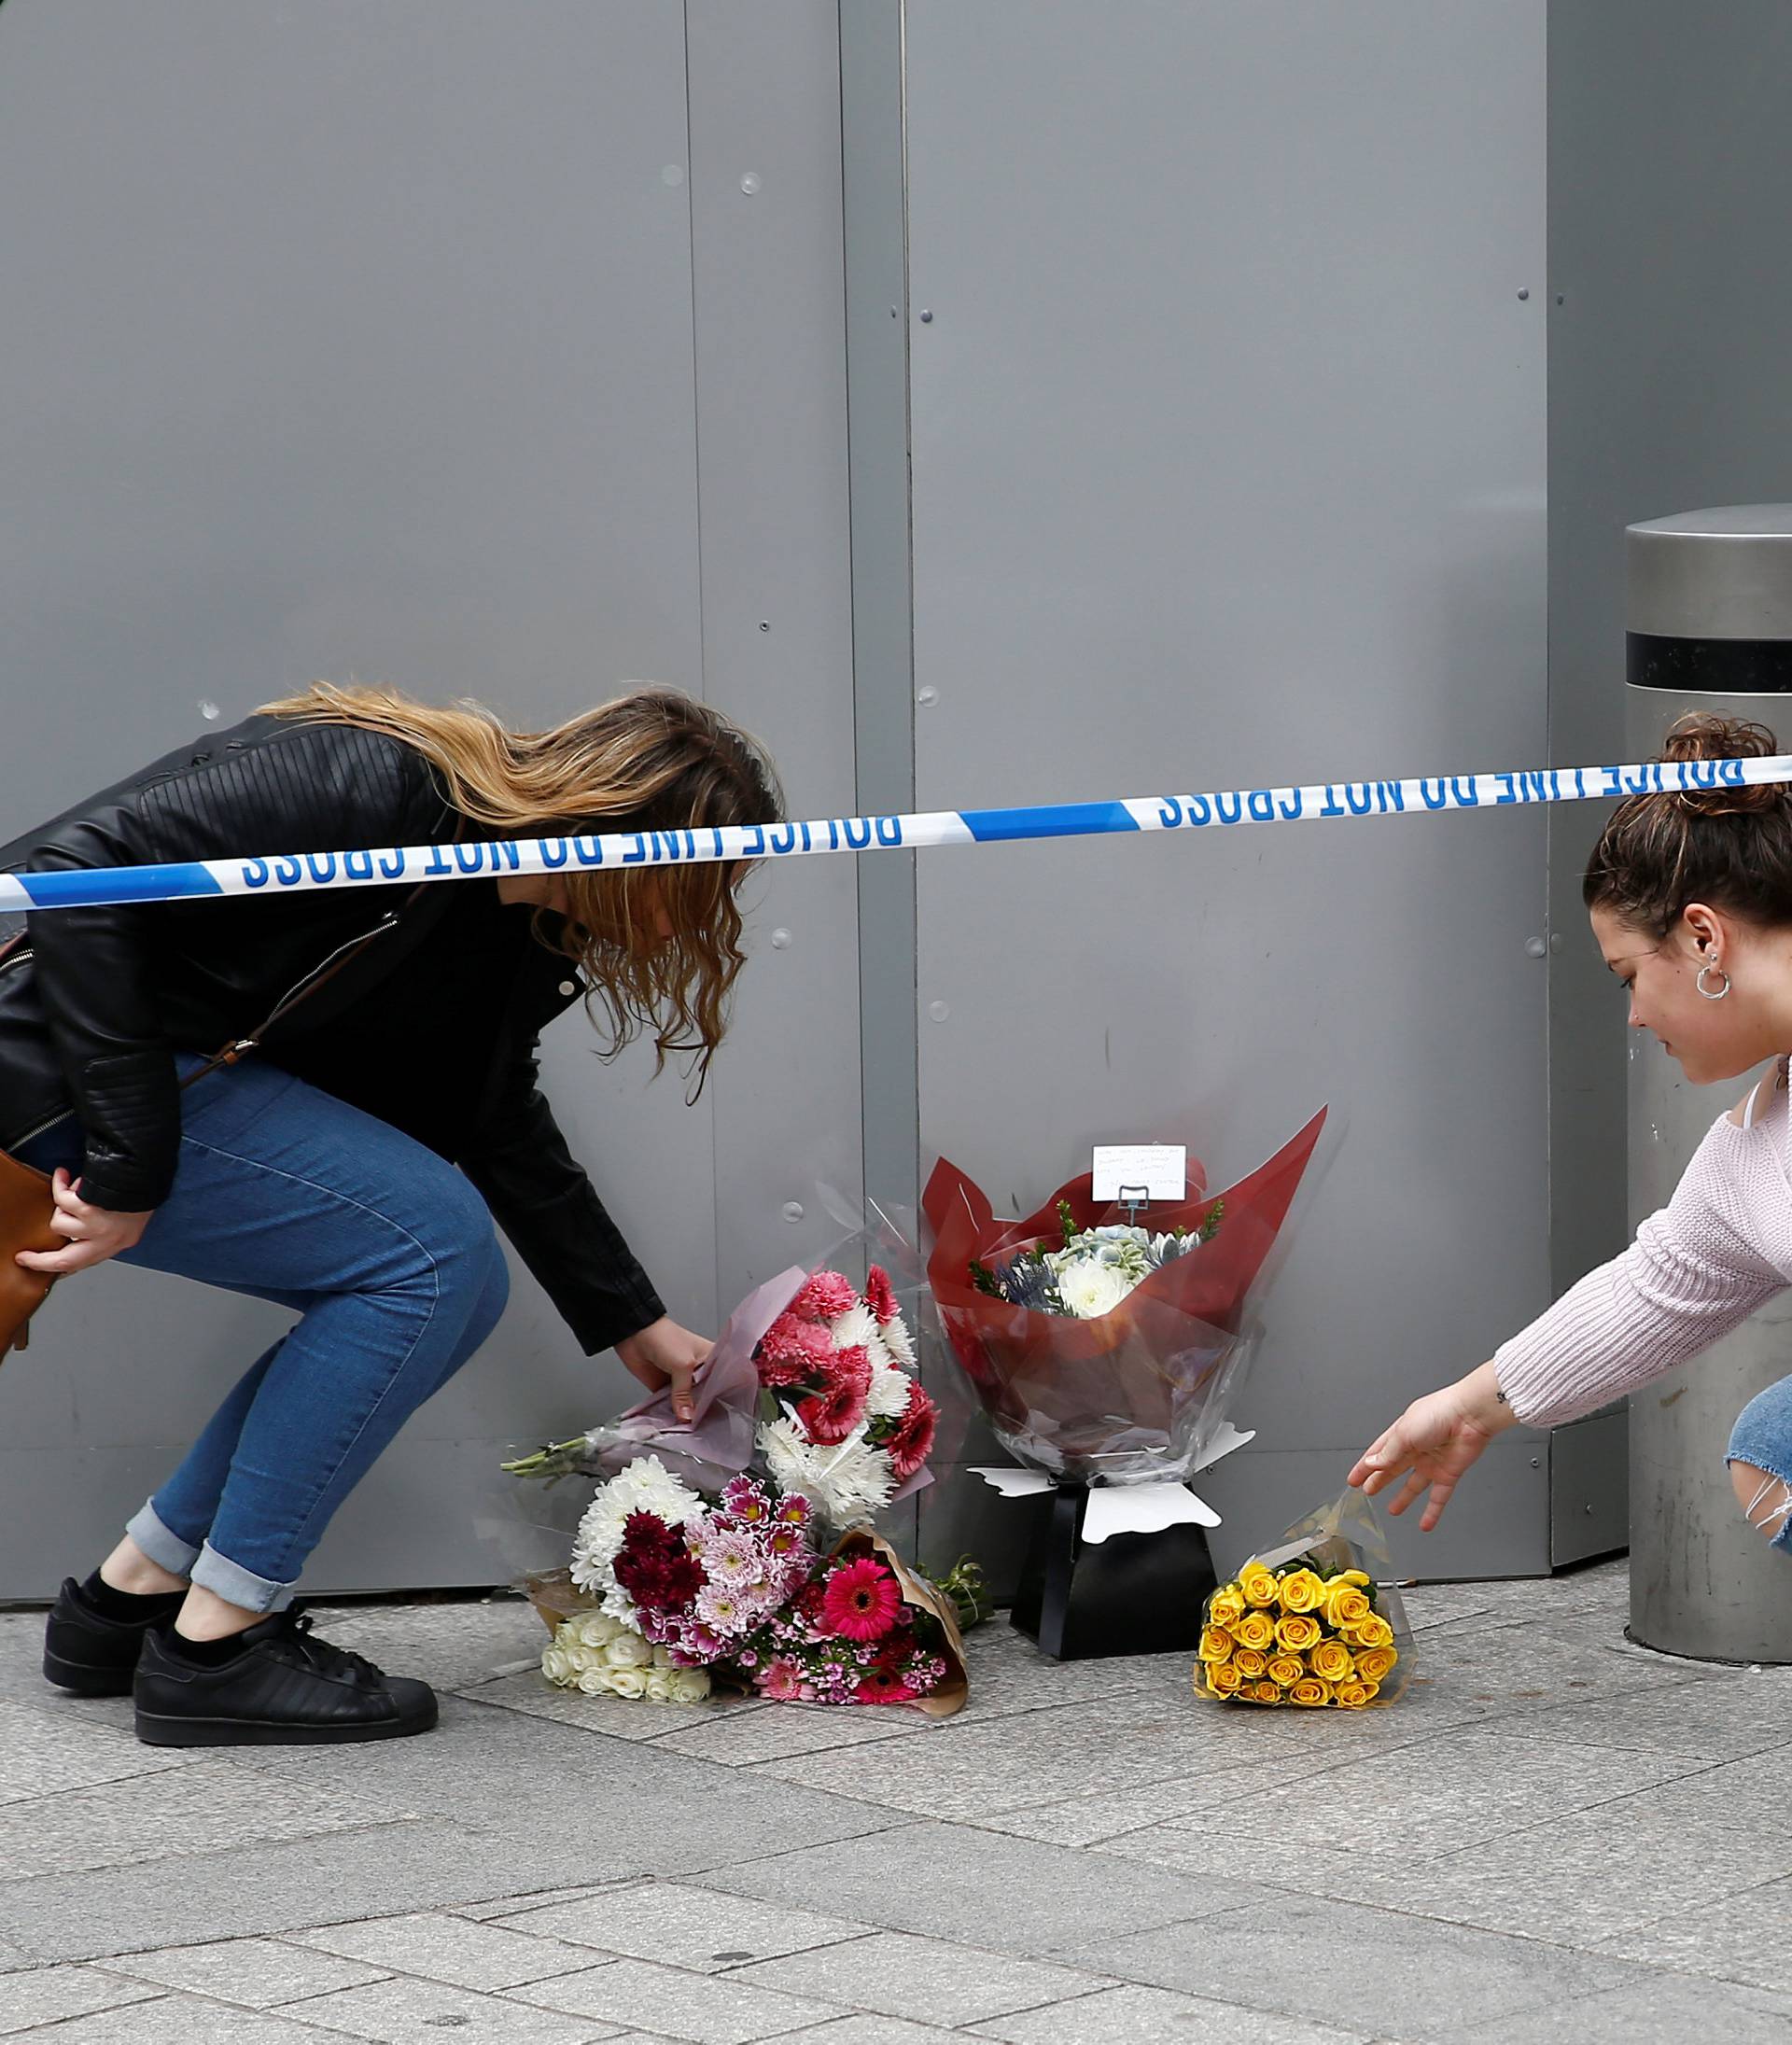 Women leave flowers near Borough Market after an attack left 7 people dead and dozens injured in London